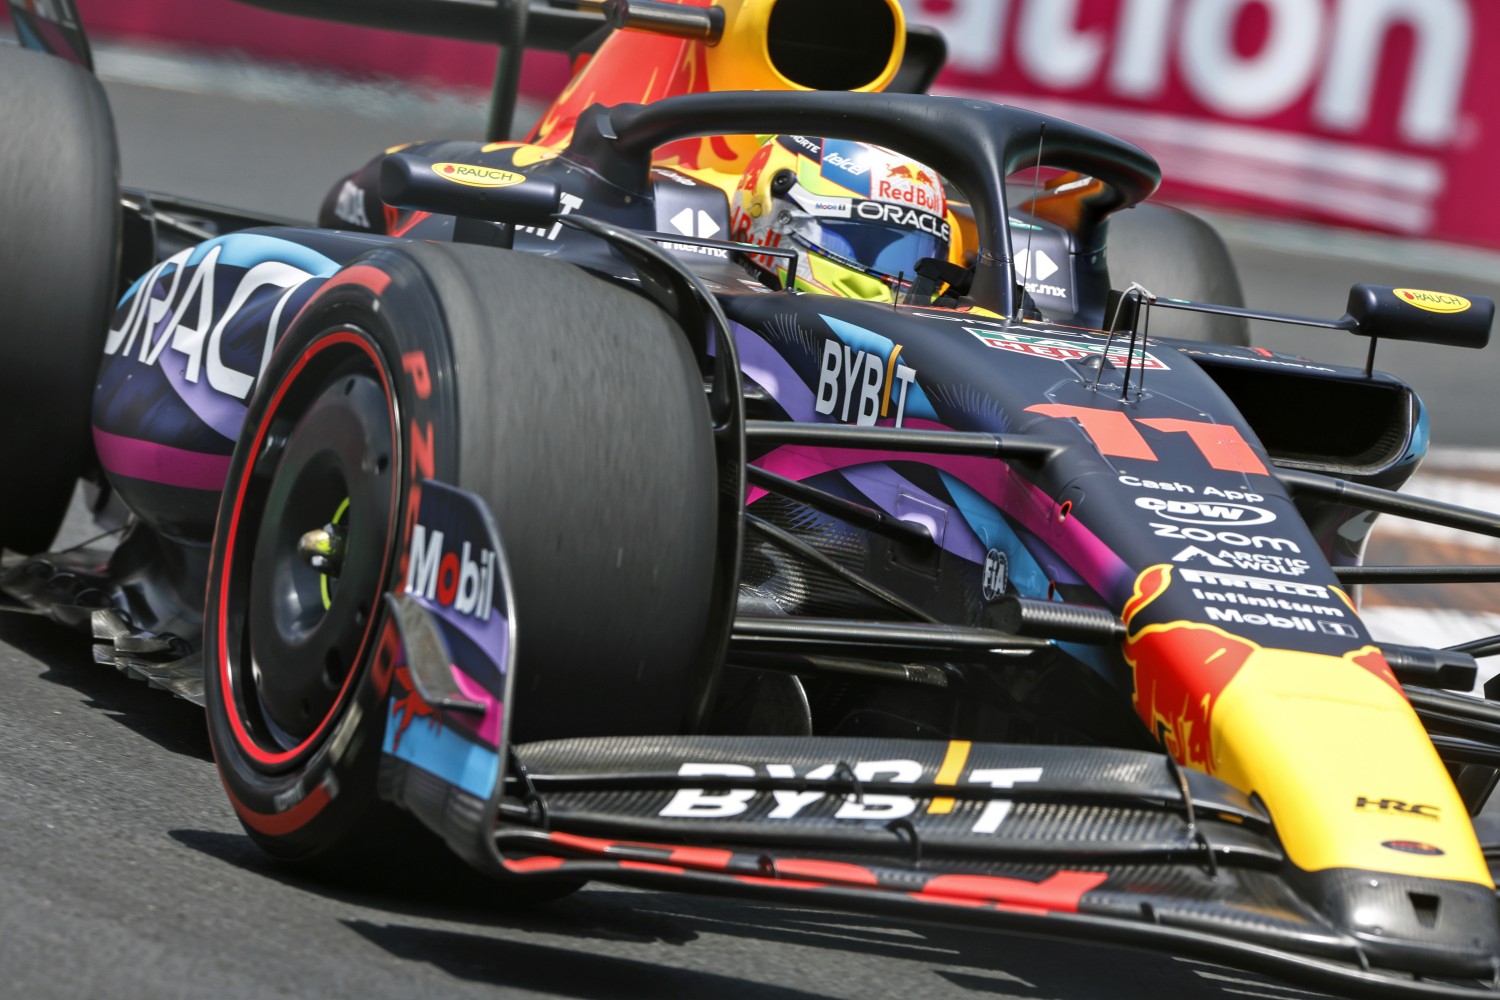 How do the Economics of Formula 1 compare to Other Sports